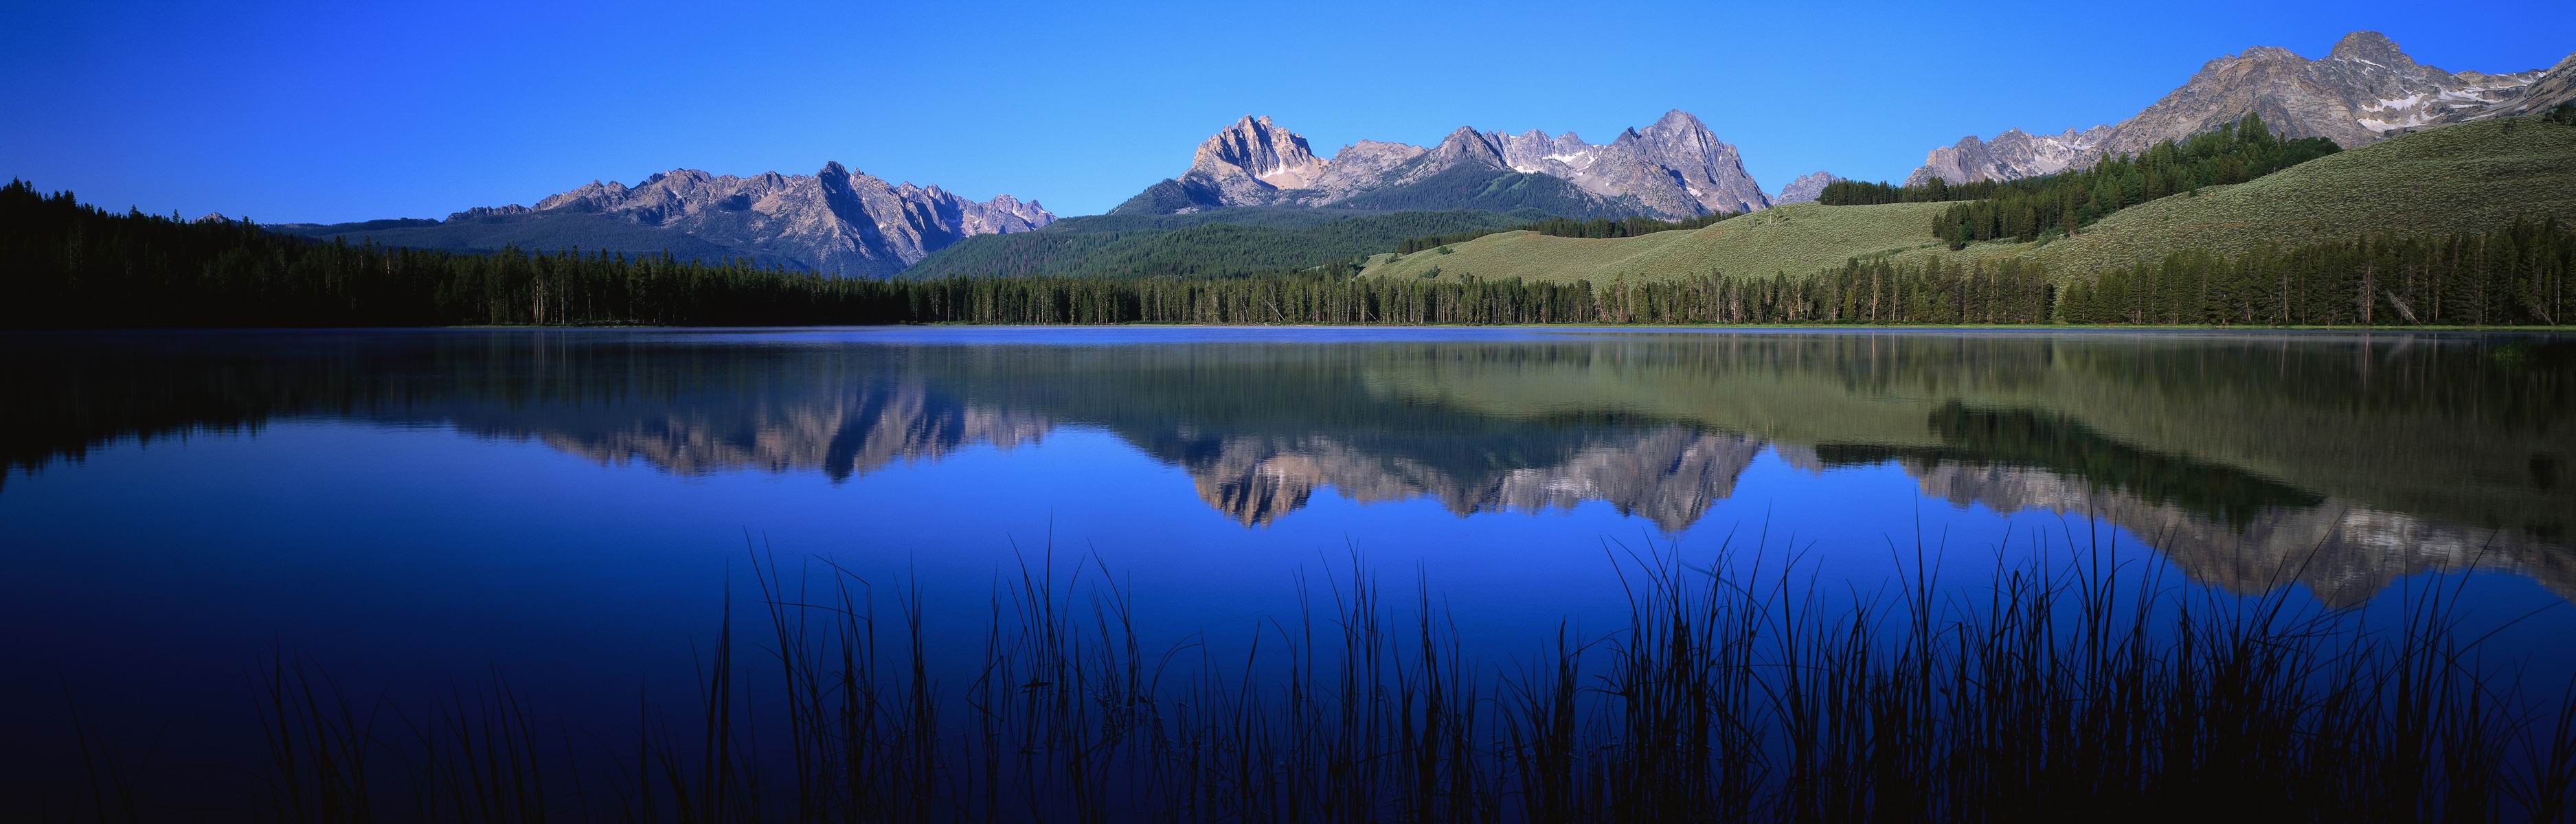 General 3750x1200 nature landscape lake reflection mountains multiple display dual monitors